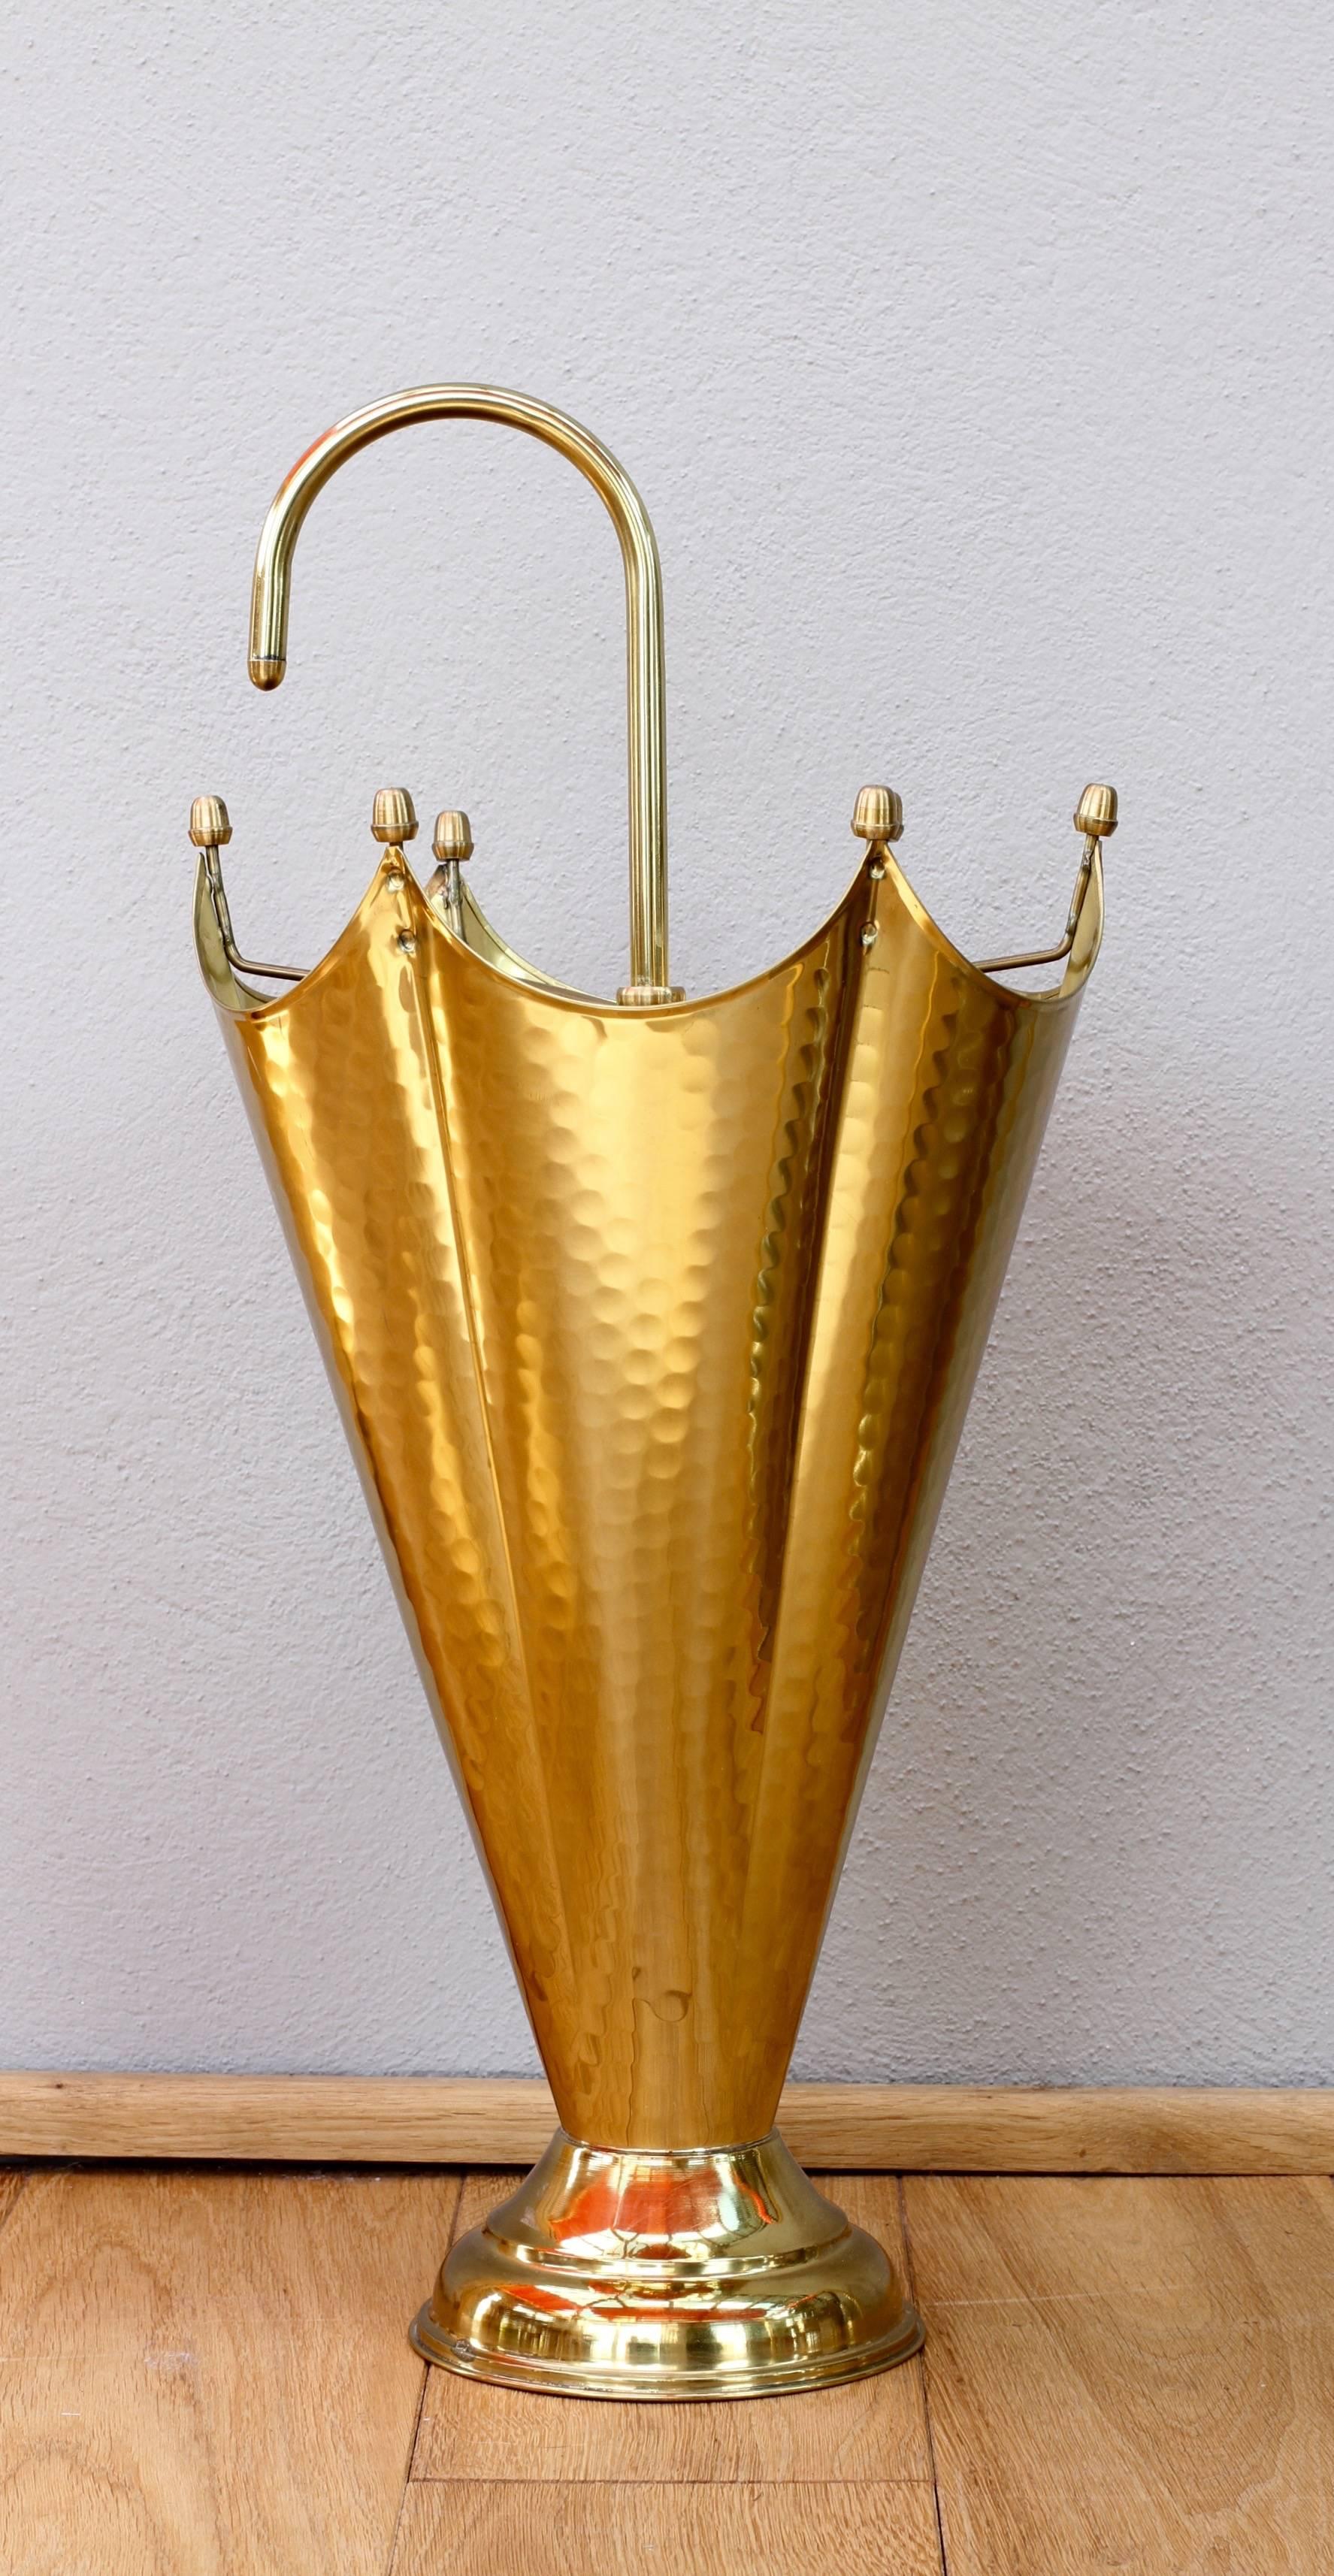 This lovely Mid-Century piece is very likely Italian or possibly French and dates between 1940-1950. Made of brass with a high copper content it shines like gold in the sun capturing and highlighting the hammered metal detailing. 

This Umbrella